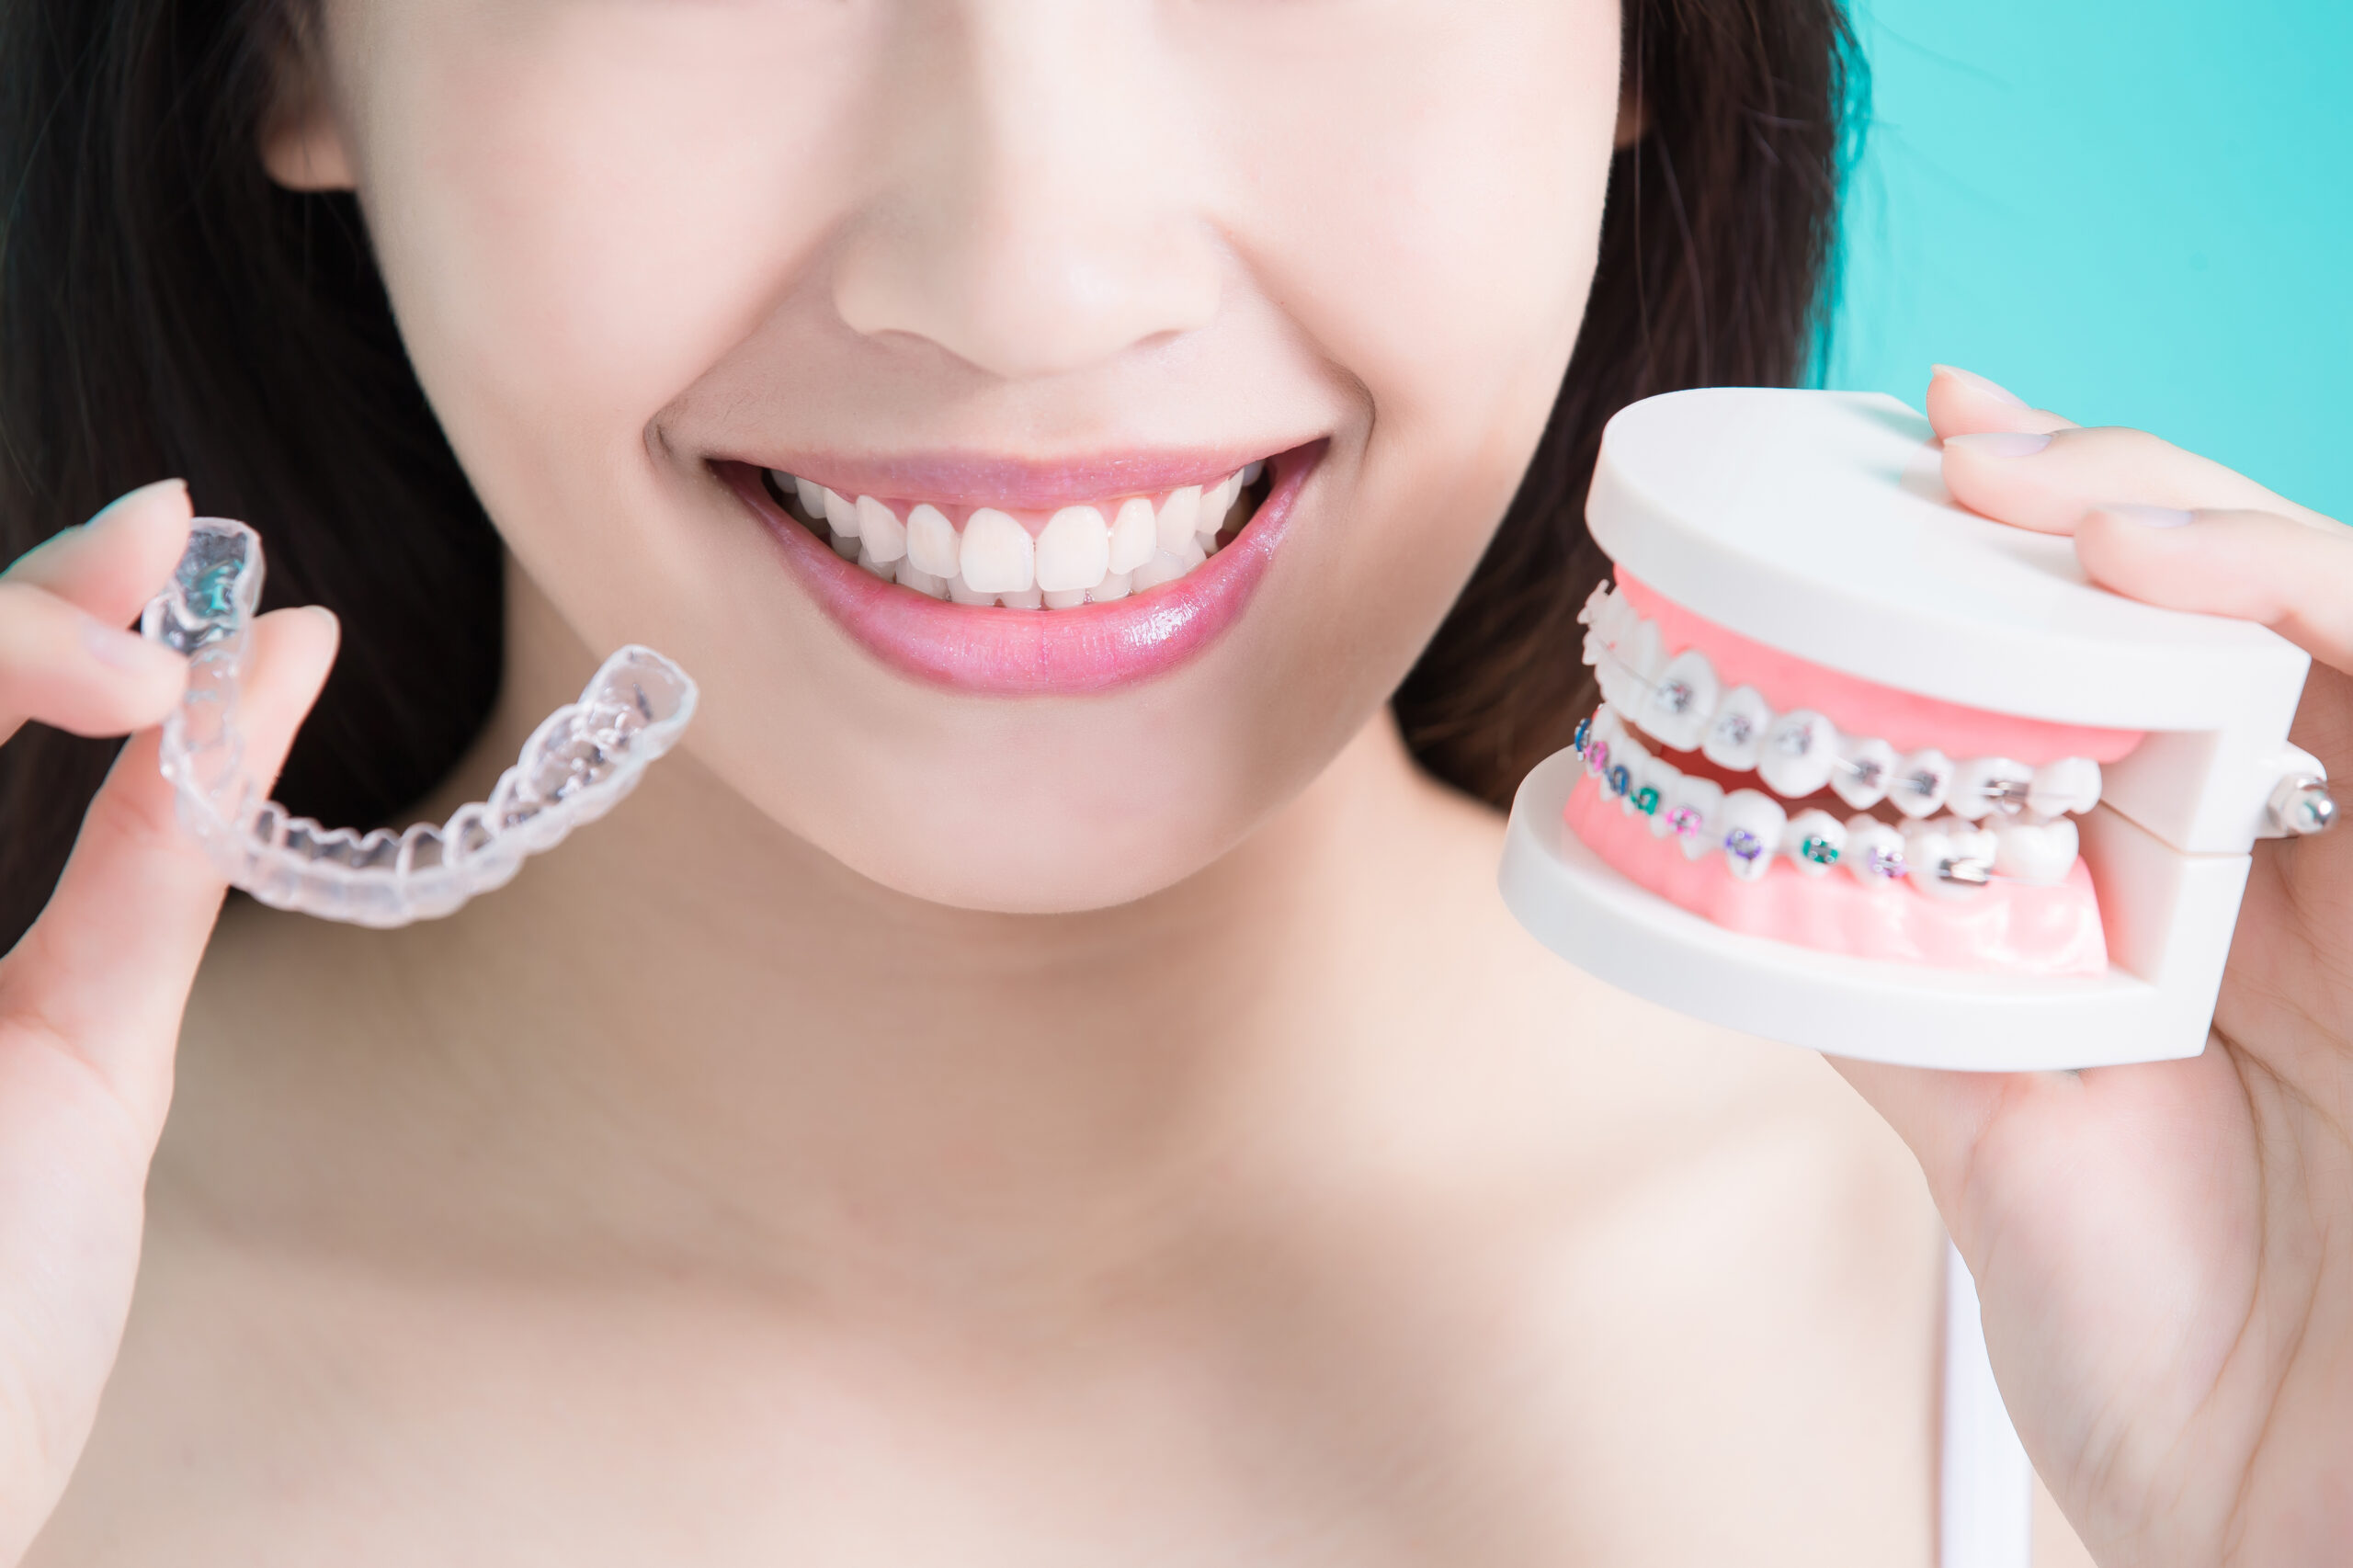 Woman making a choice to go with Invisalign or braces